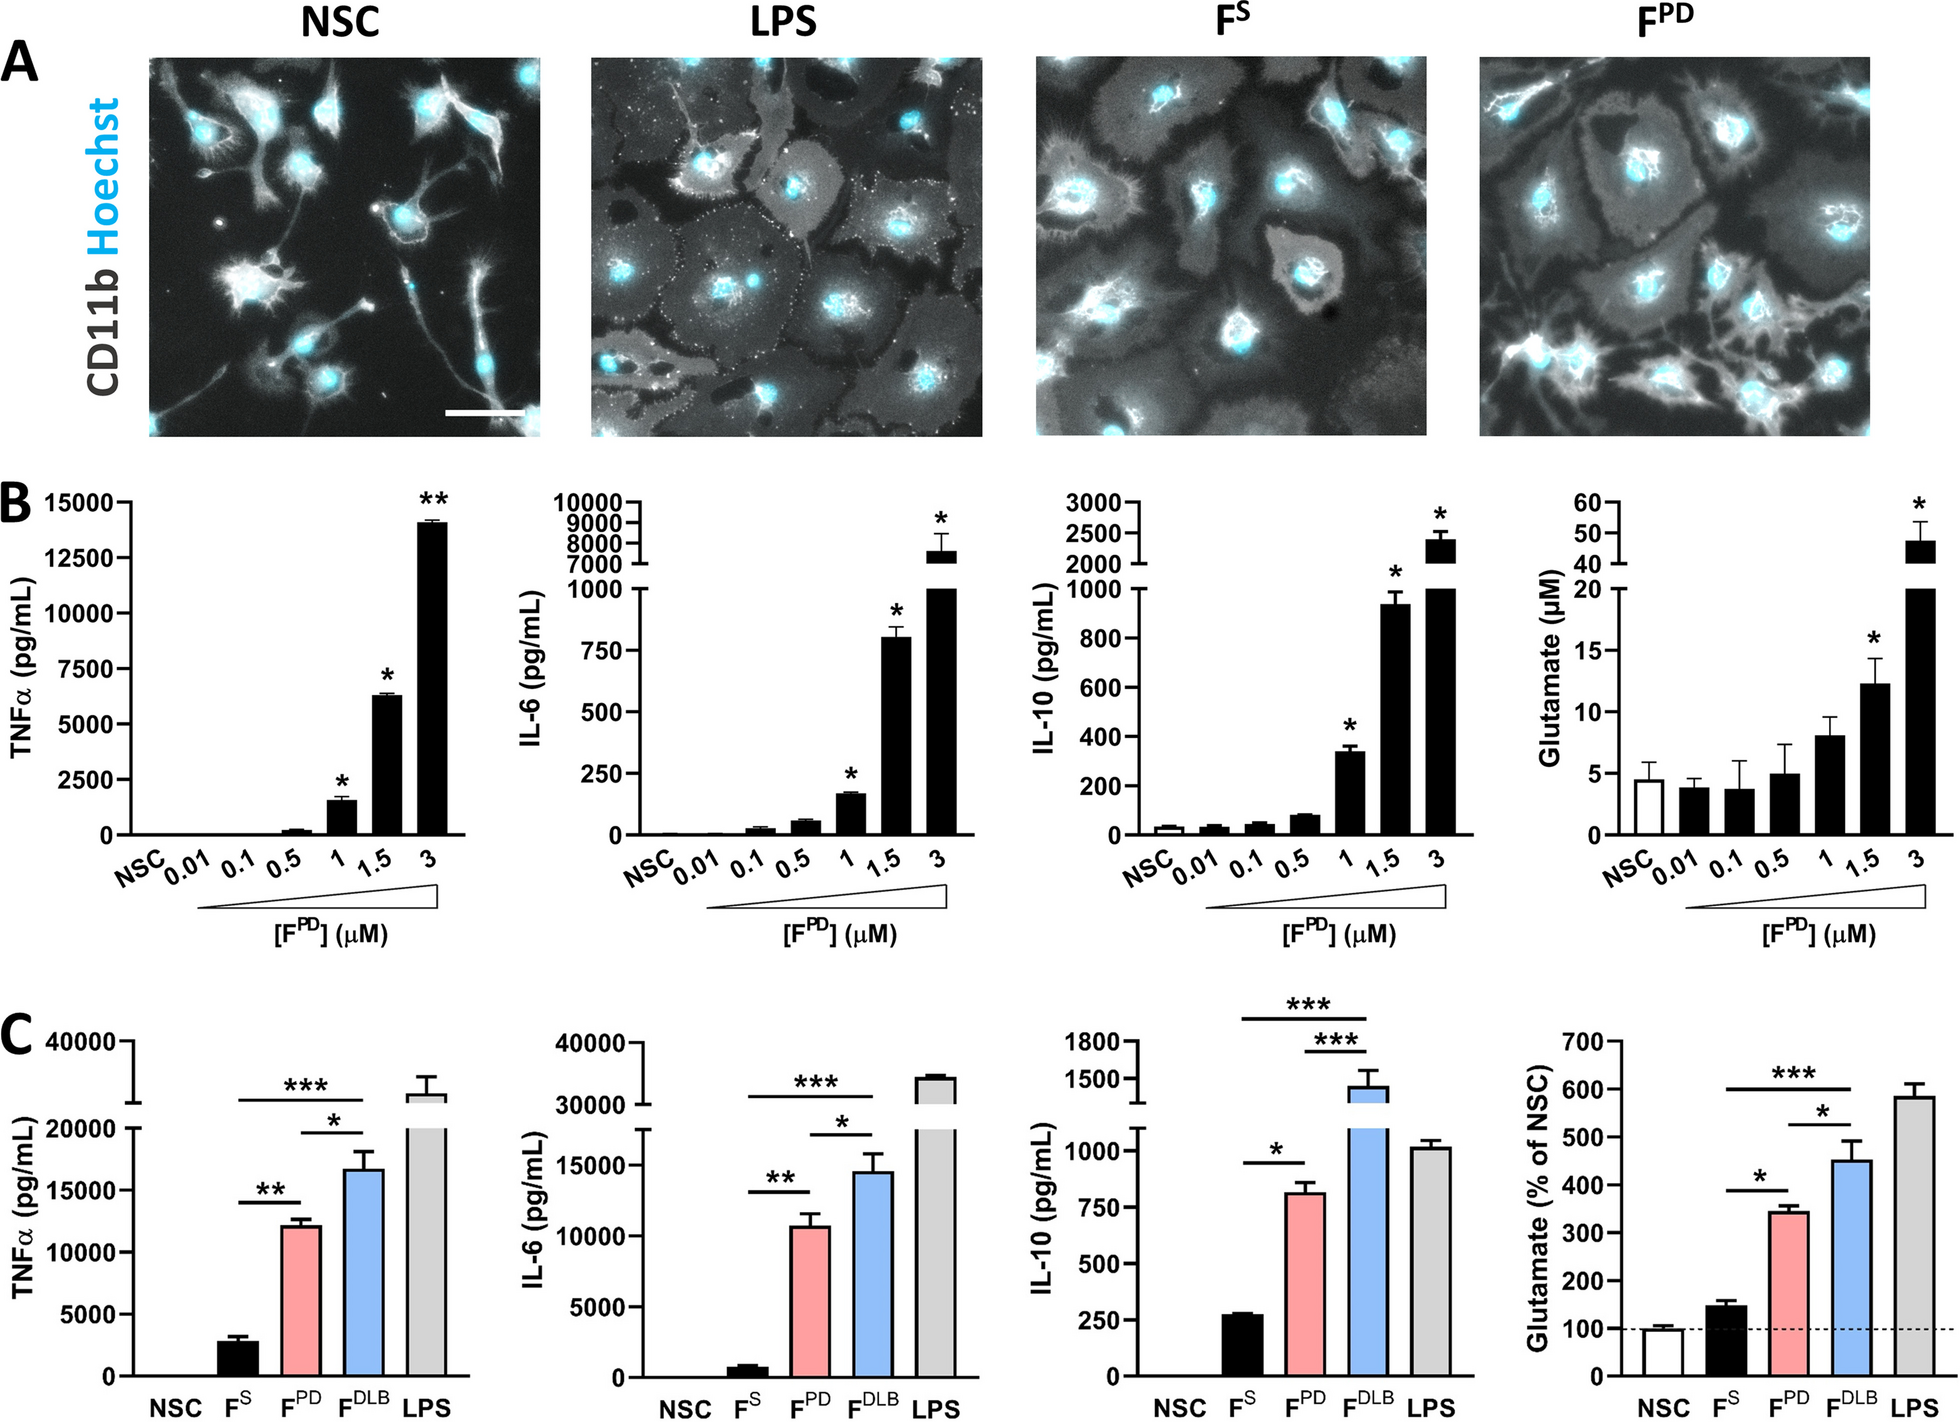 Parkinson’s disease-derived α-synuclein assemblies combined with chronic-type inflammatory cues promote a neurotoxic microglial phenotype